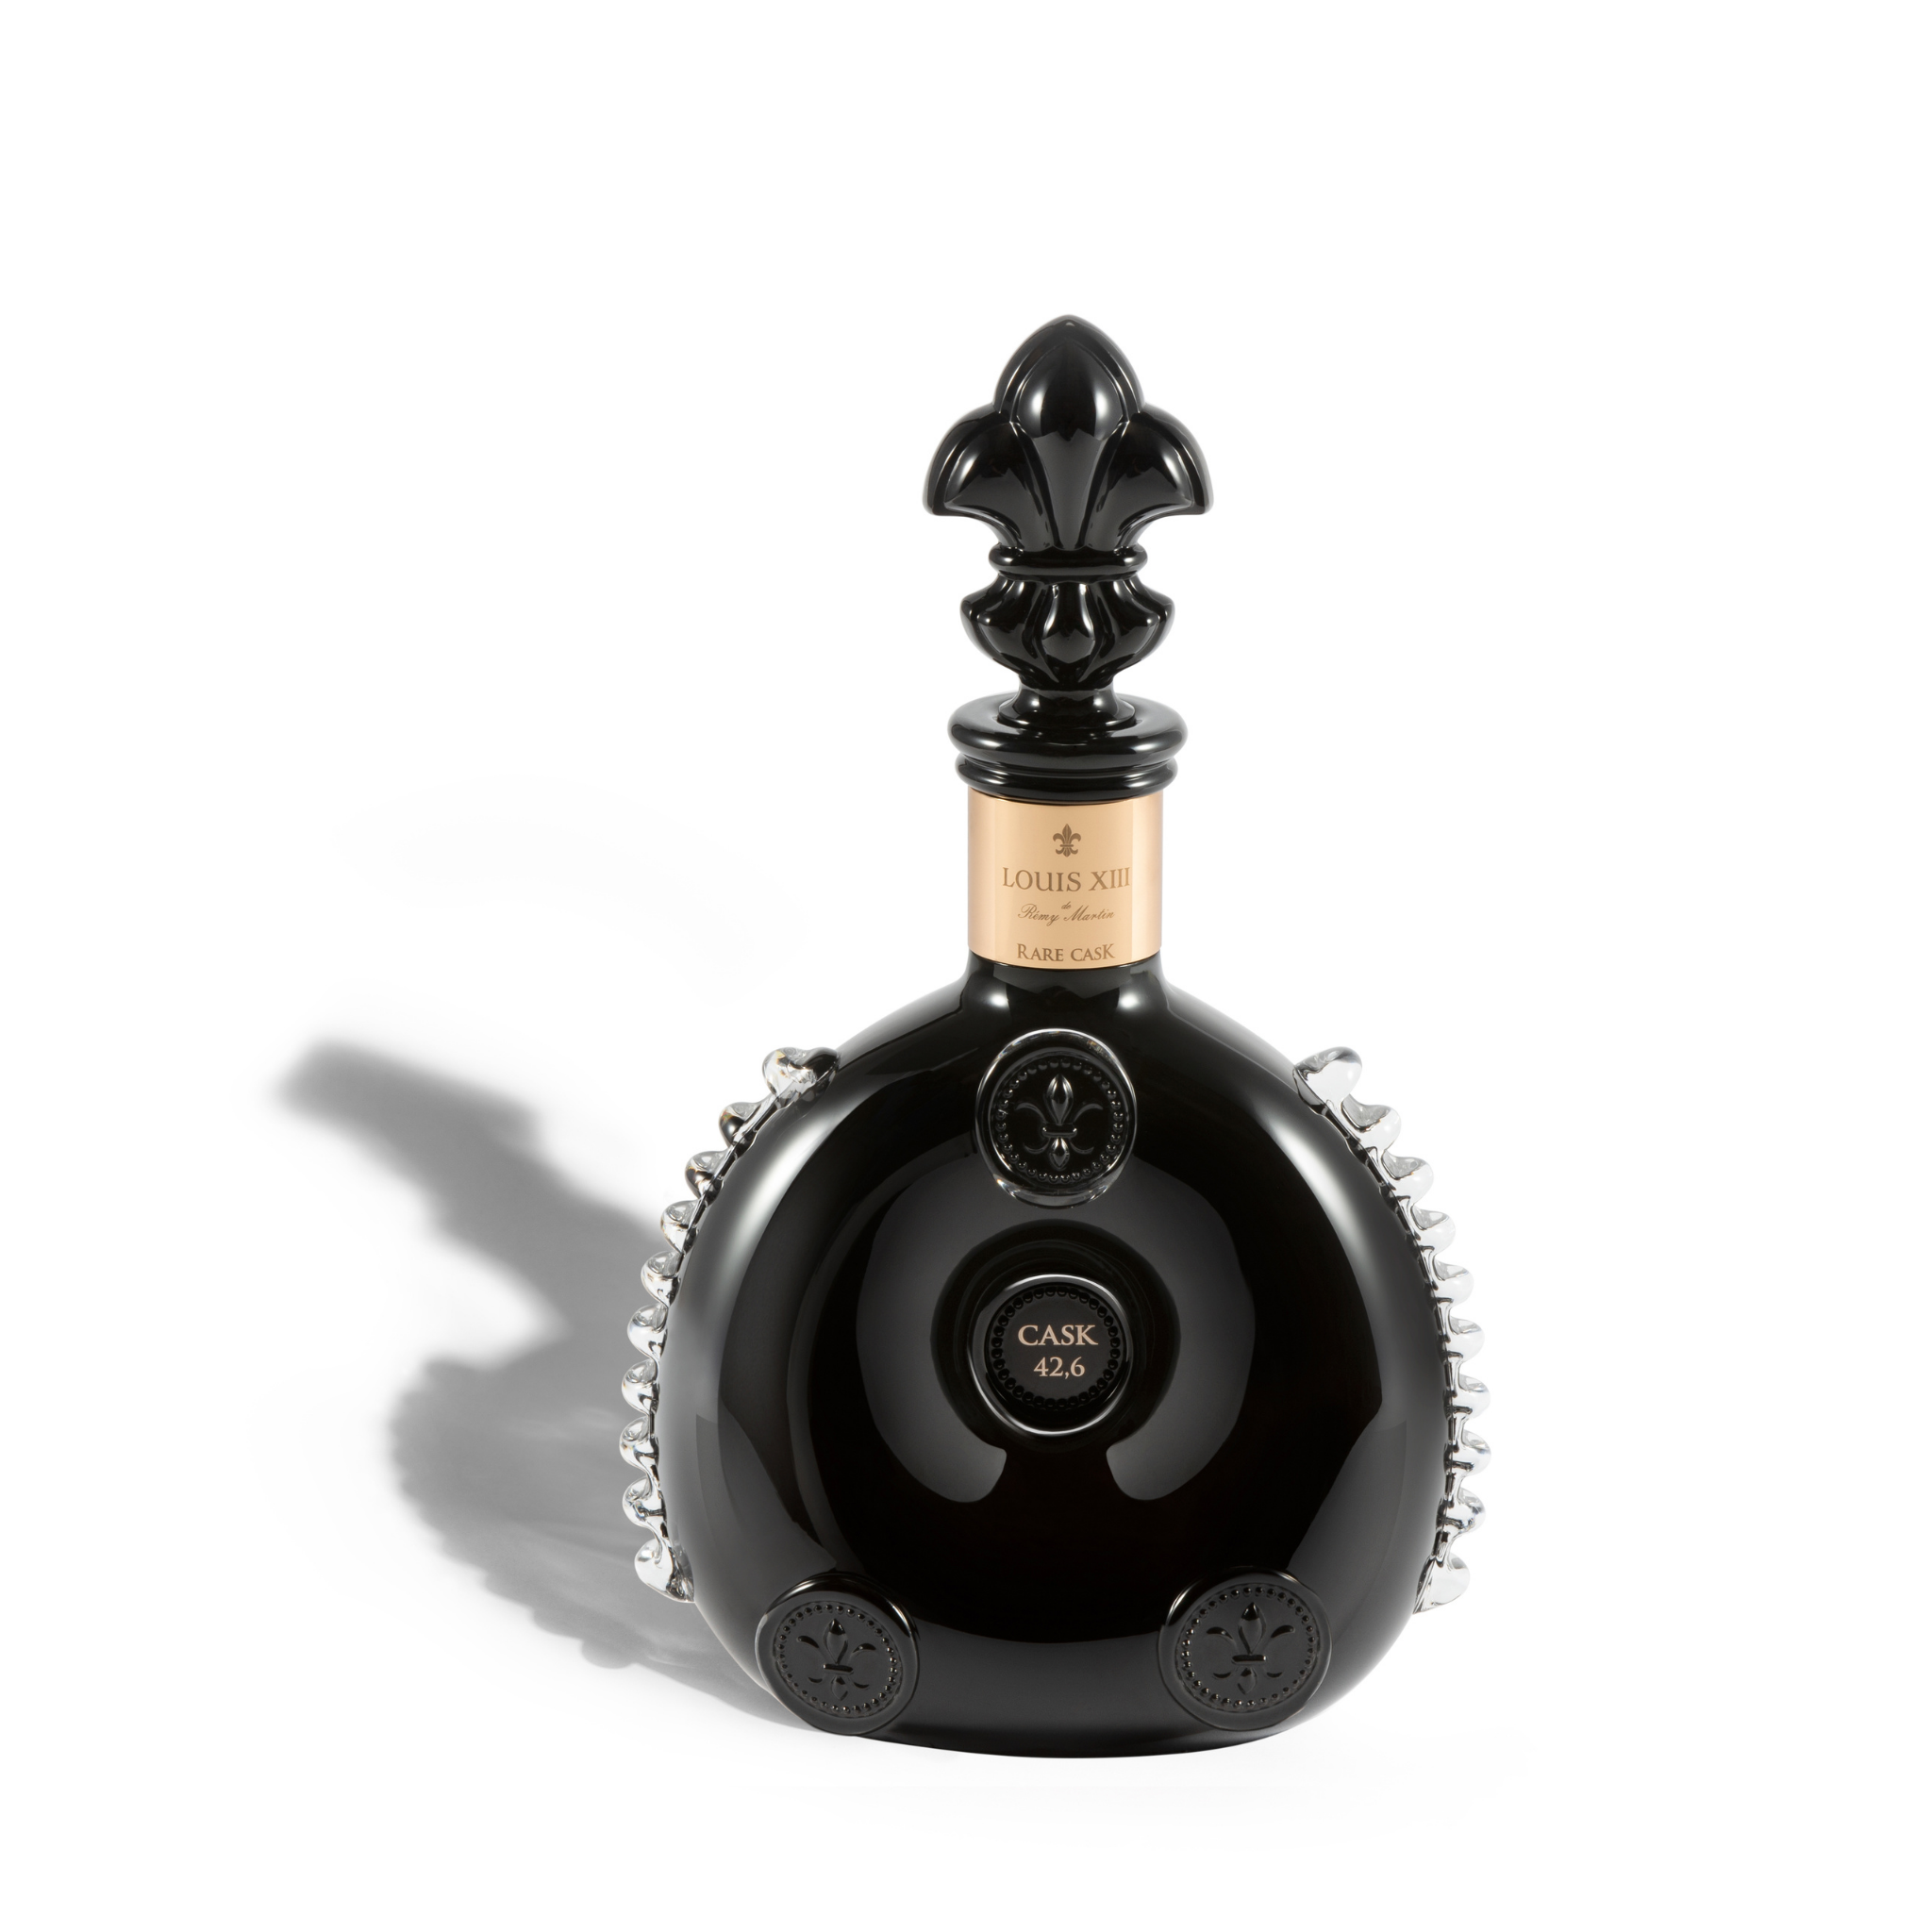 REMY MARTIN LOUIS XIII TIME COLLECTION: TRIBUTE TO CITY OF LIGHTS – 1900